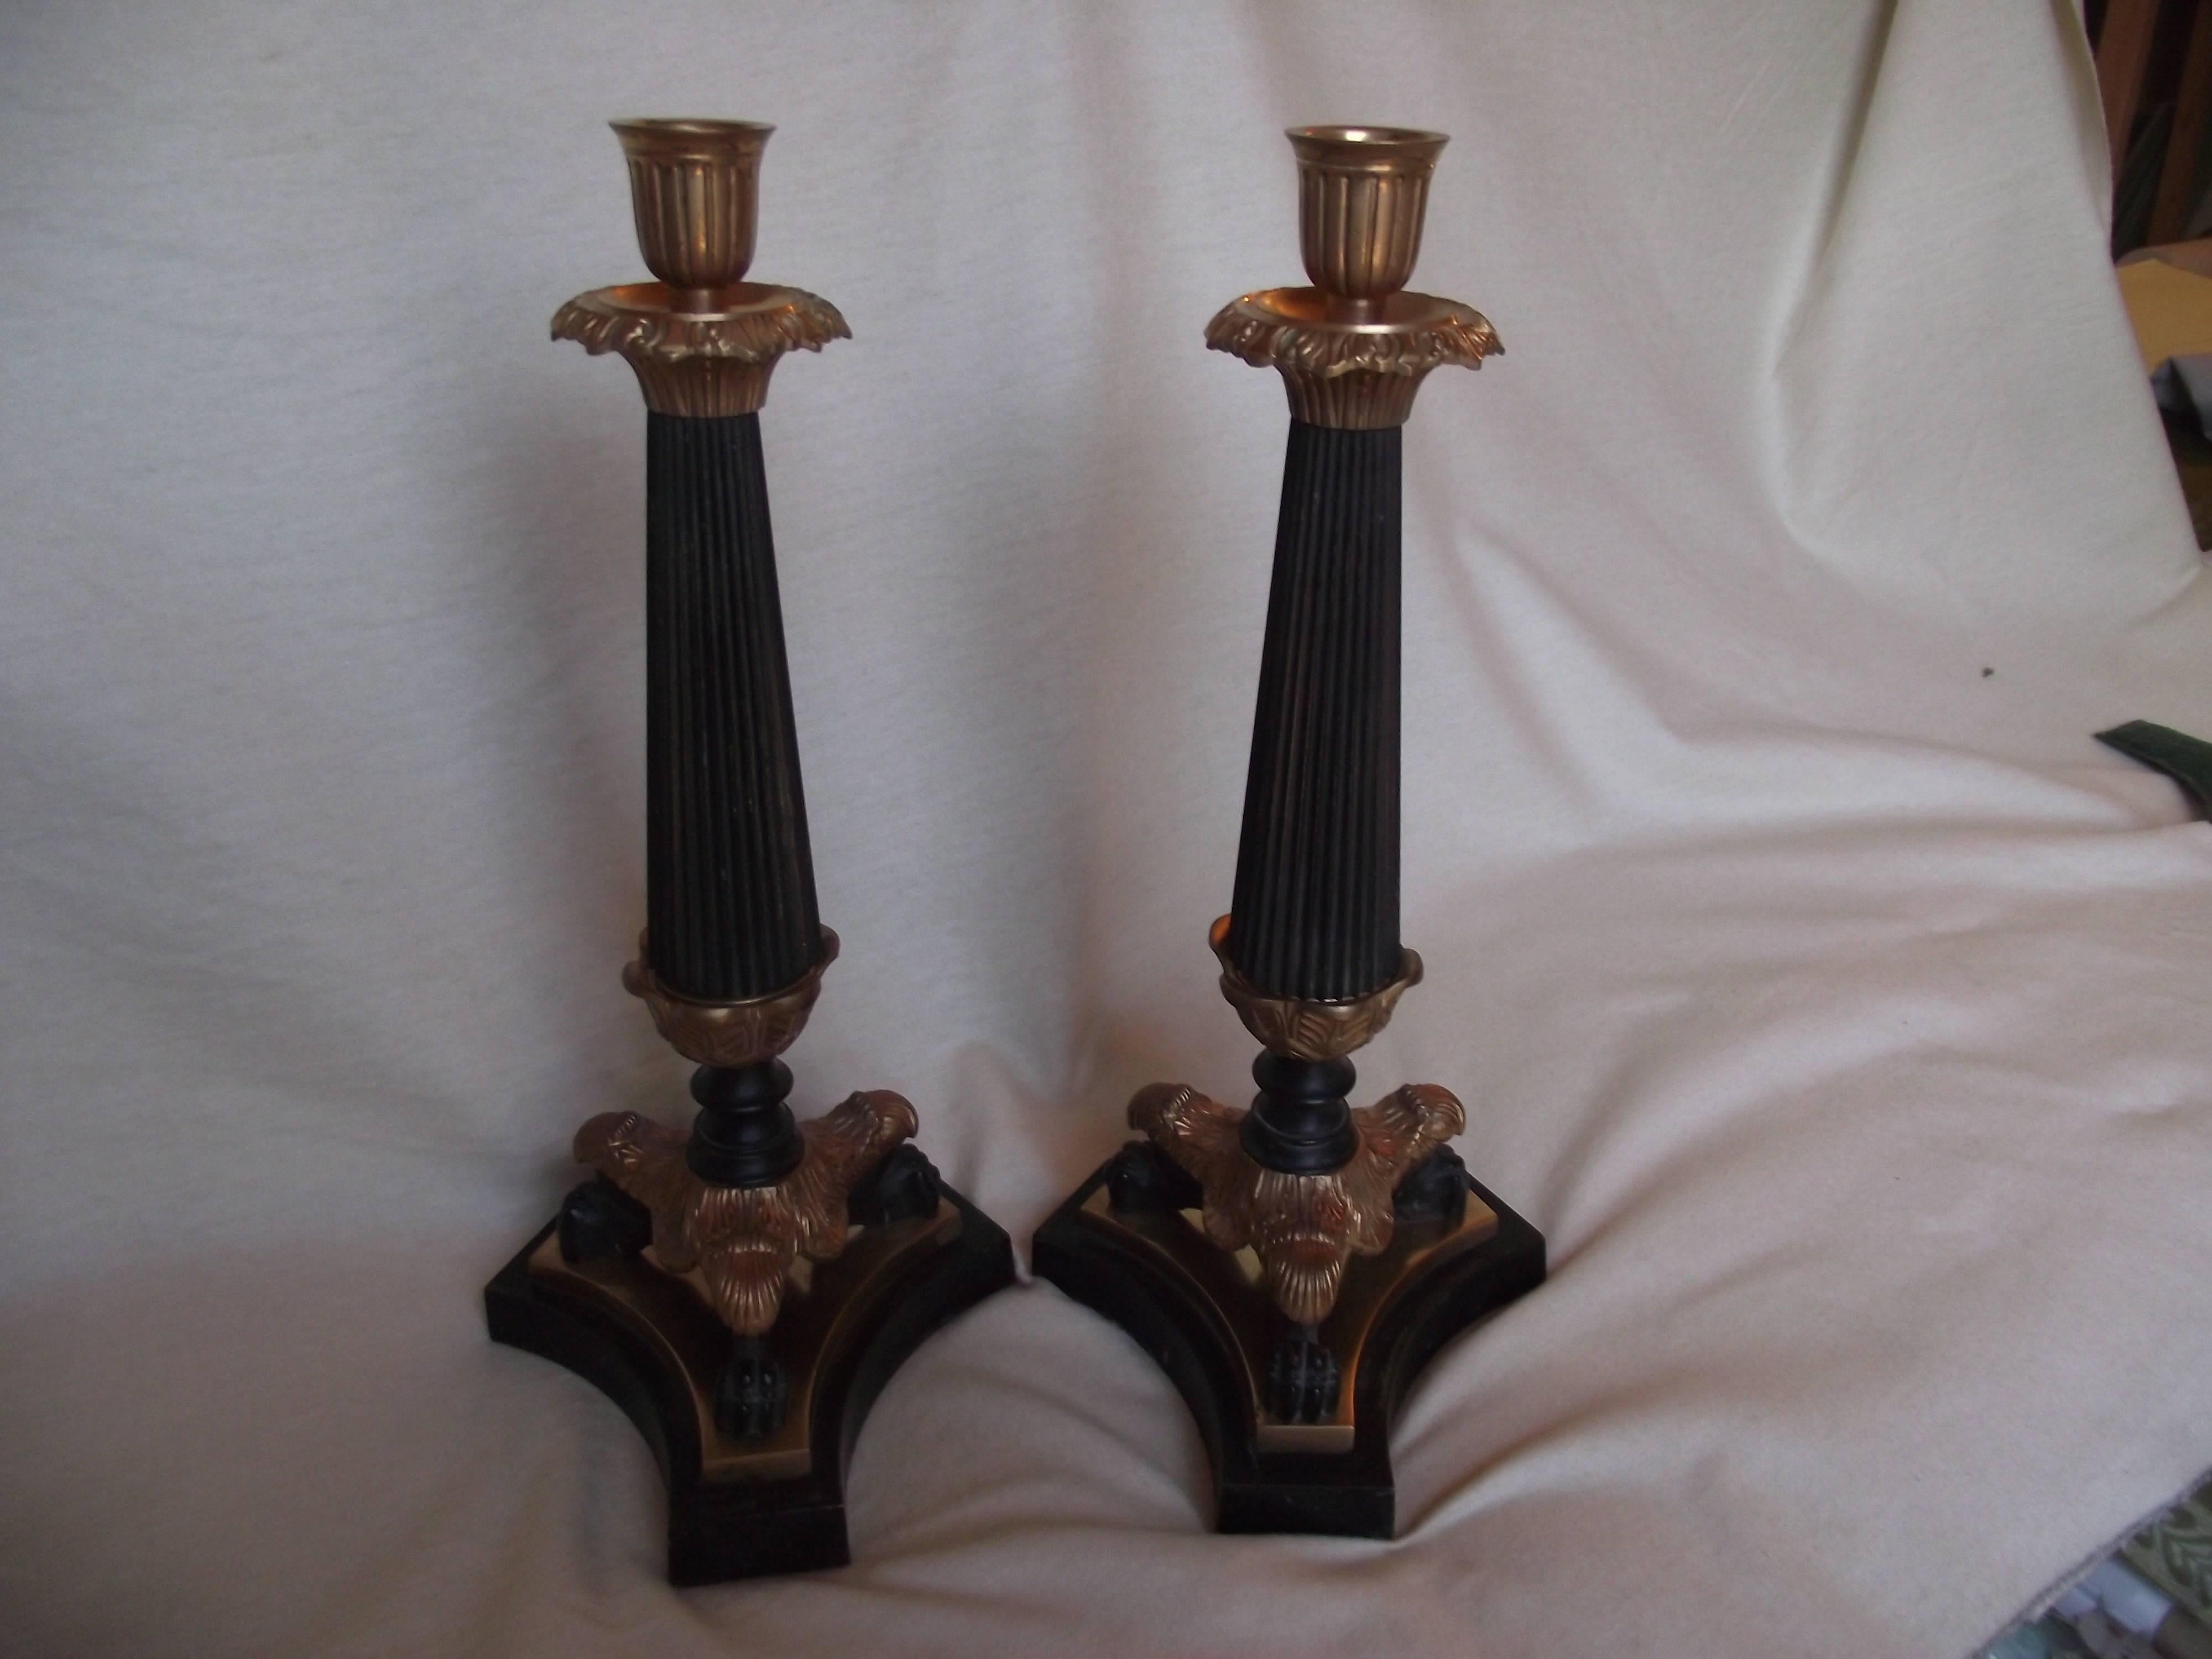 The beautiful neoclassic candlesticks are an apparent departure from Tinos, Denmark’s best known Art Deco styling. They are very heavy and in great condition.